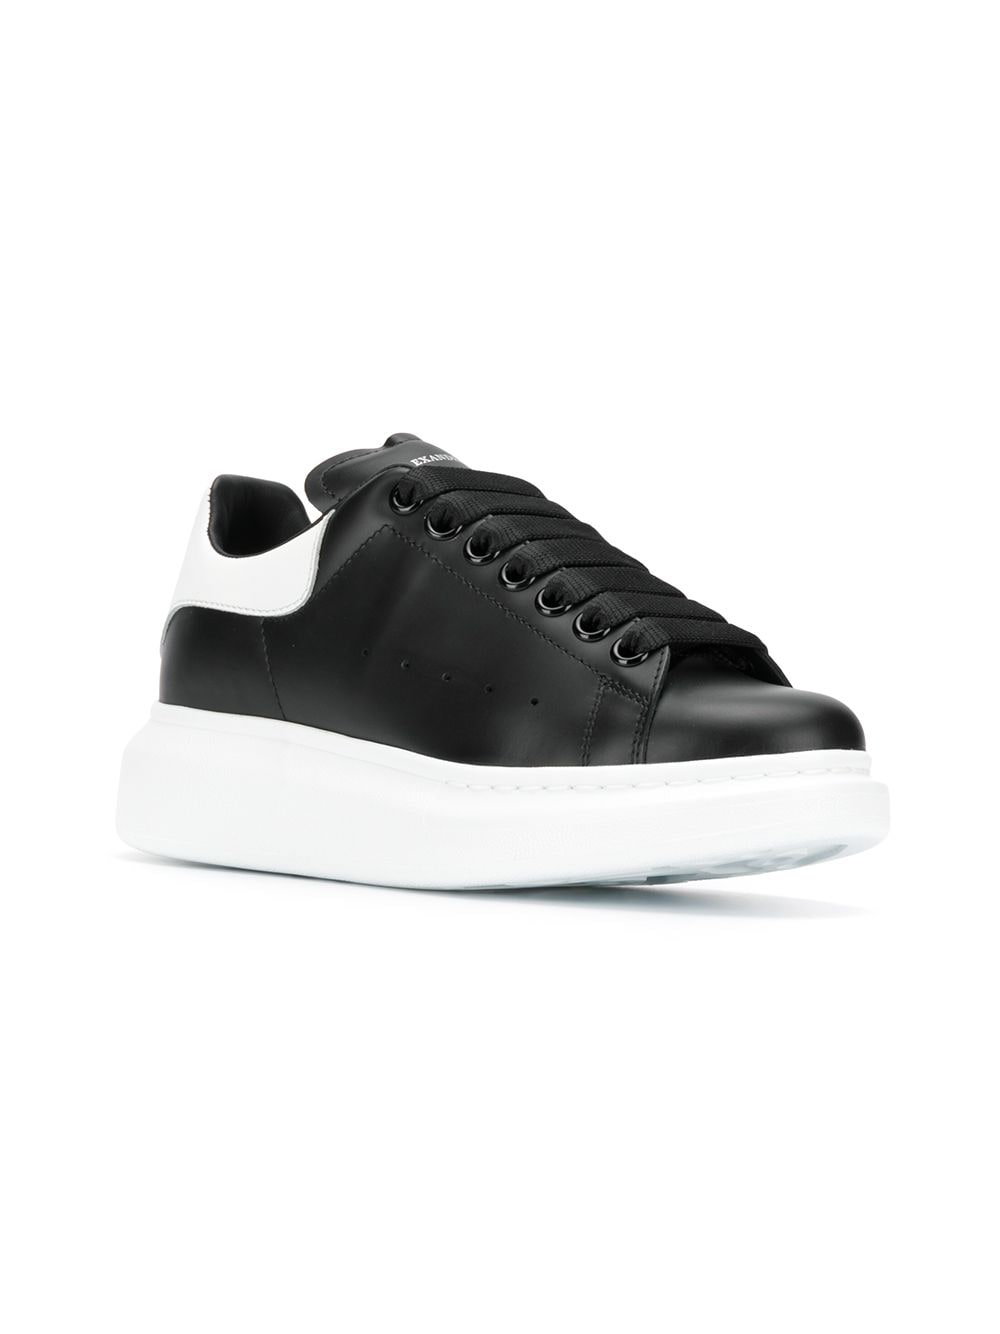 Black/white leather/suede oversized low-top sneakers